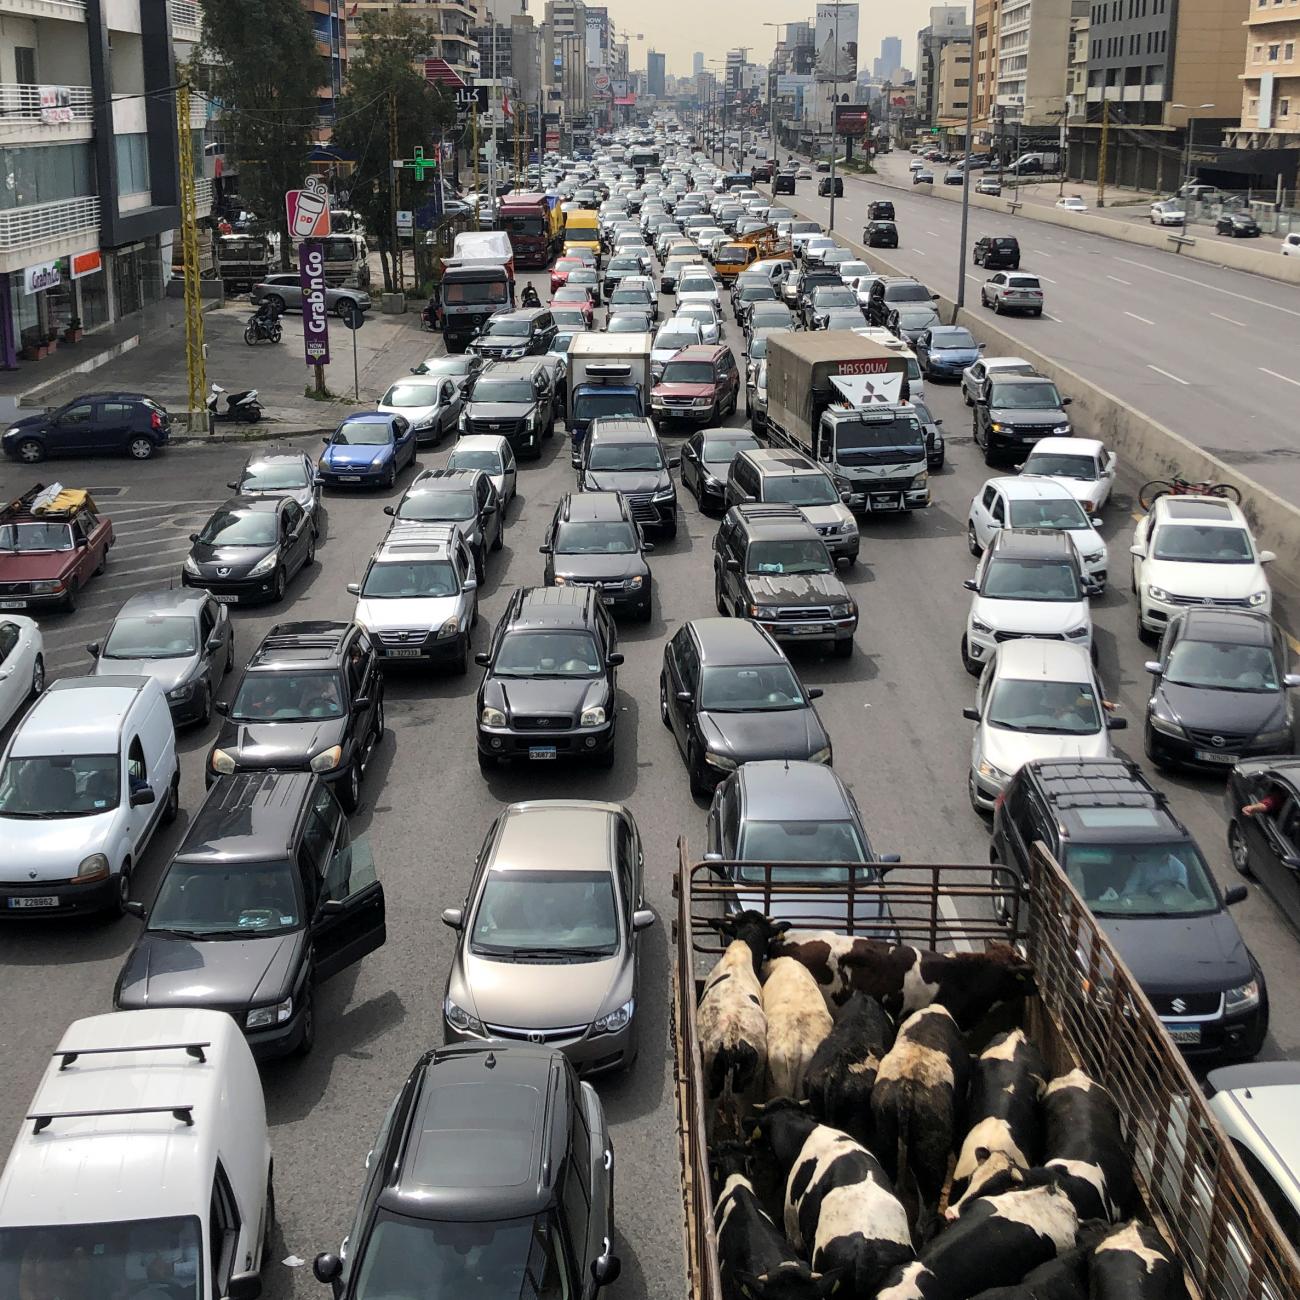 Vehicles are stuck in a traffic jam on a highway, in Jal el-Dib, Lebanon, on March 9, 2021.